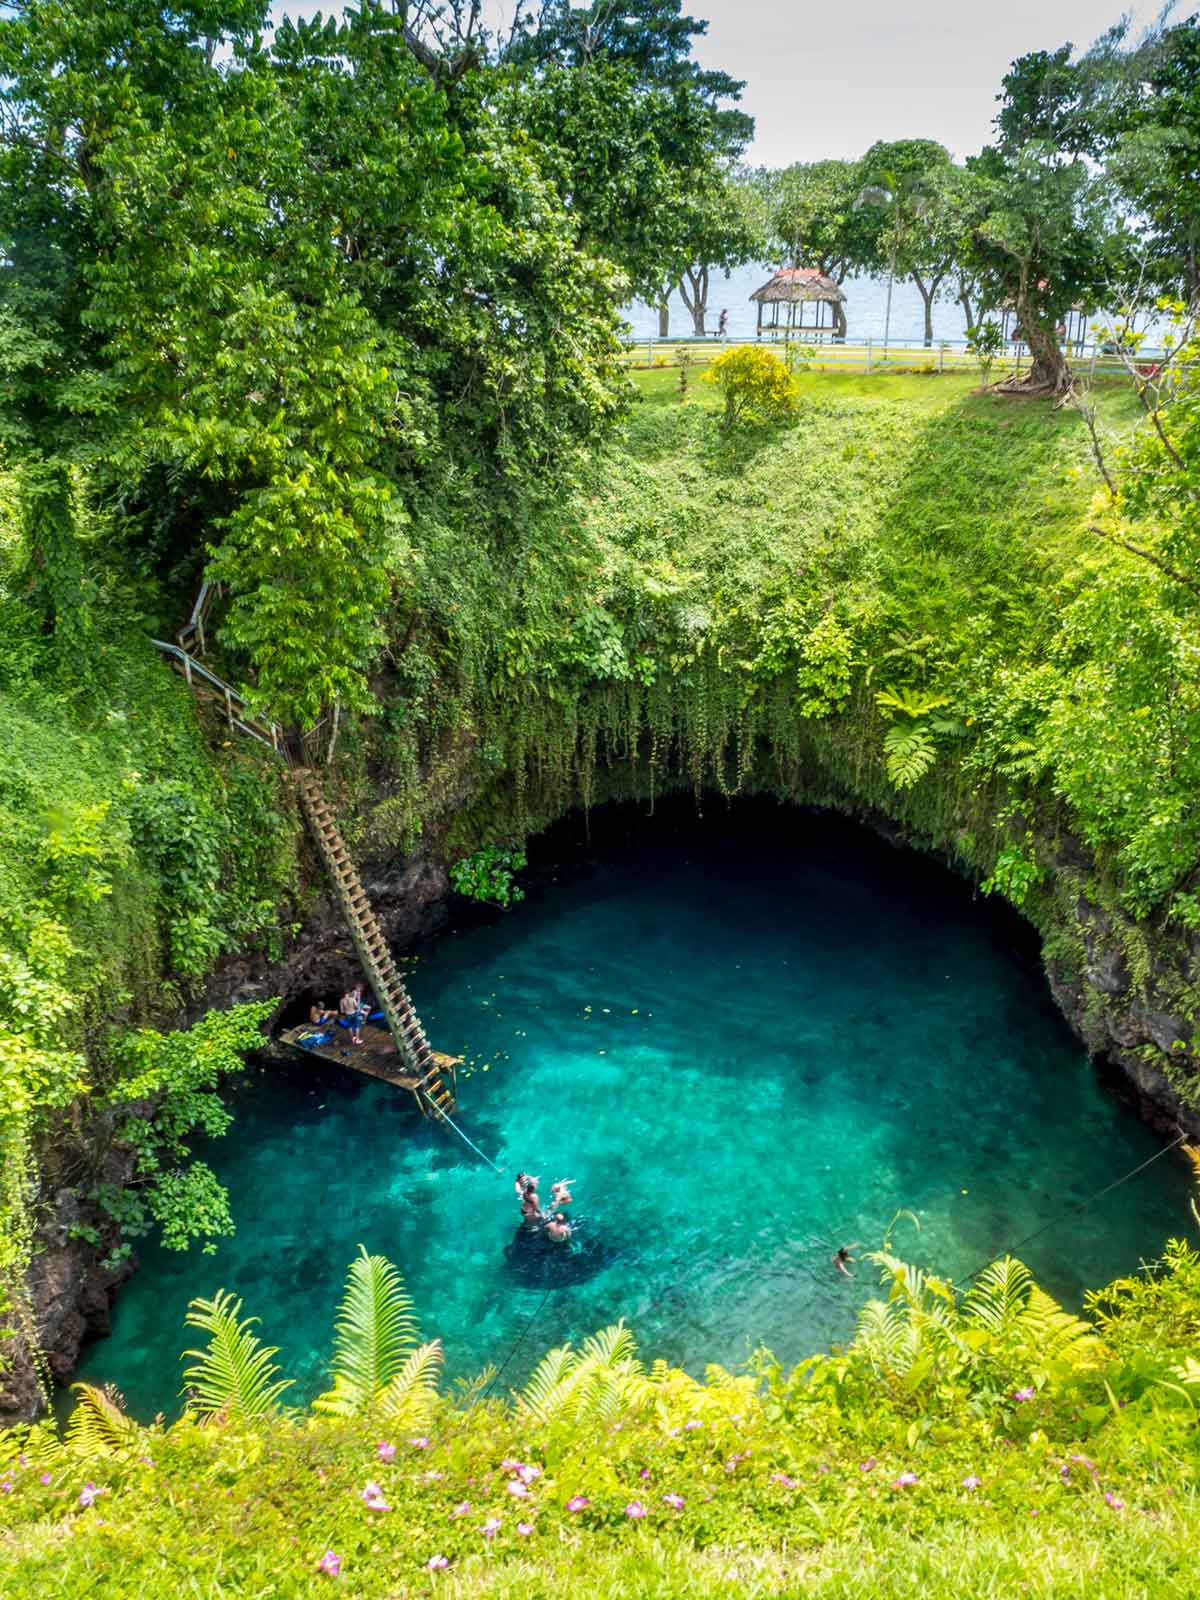 Overview of To-Sua Ocean Trench